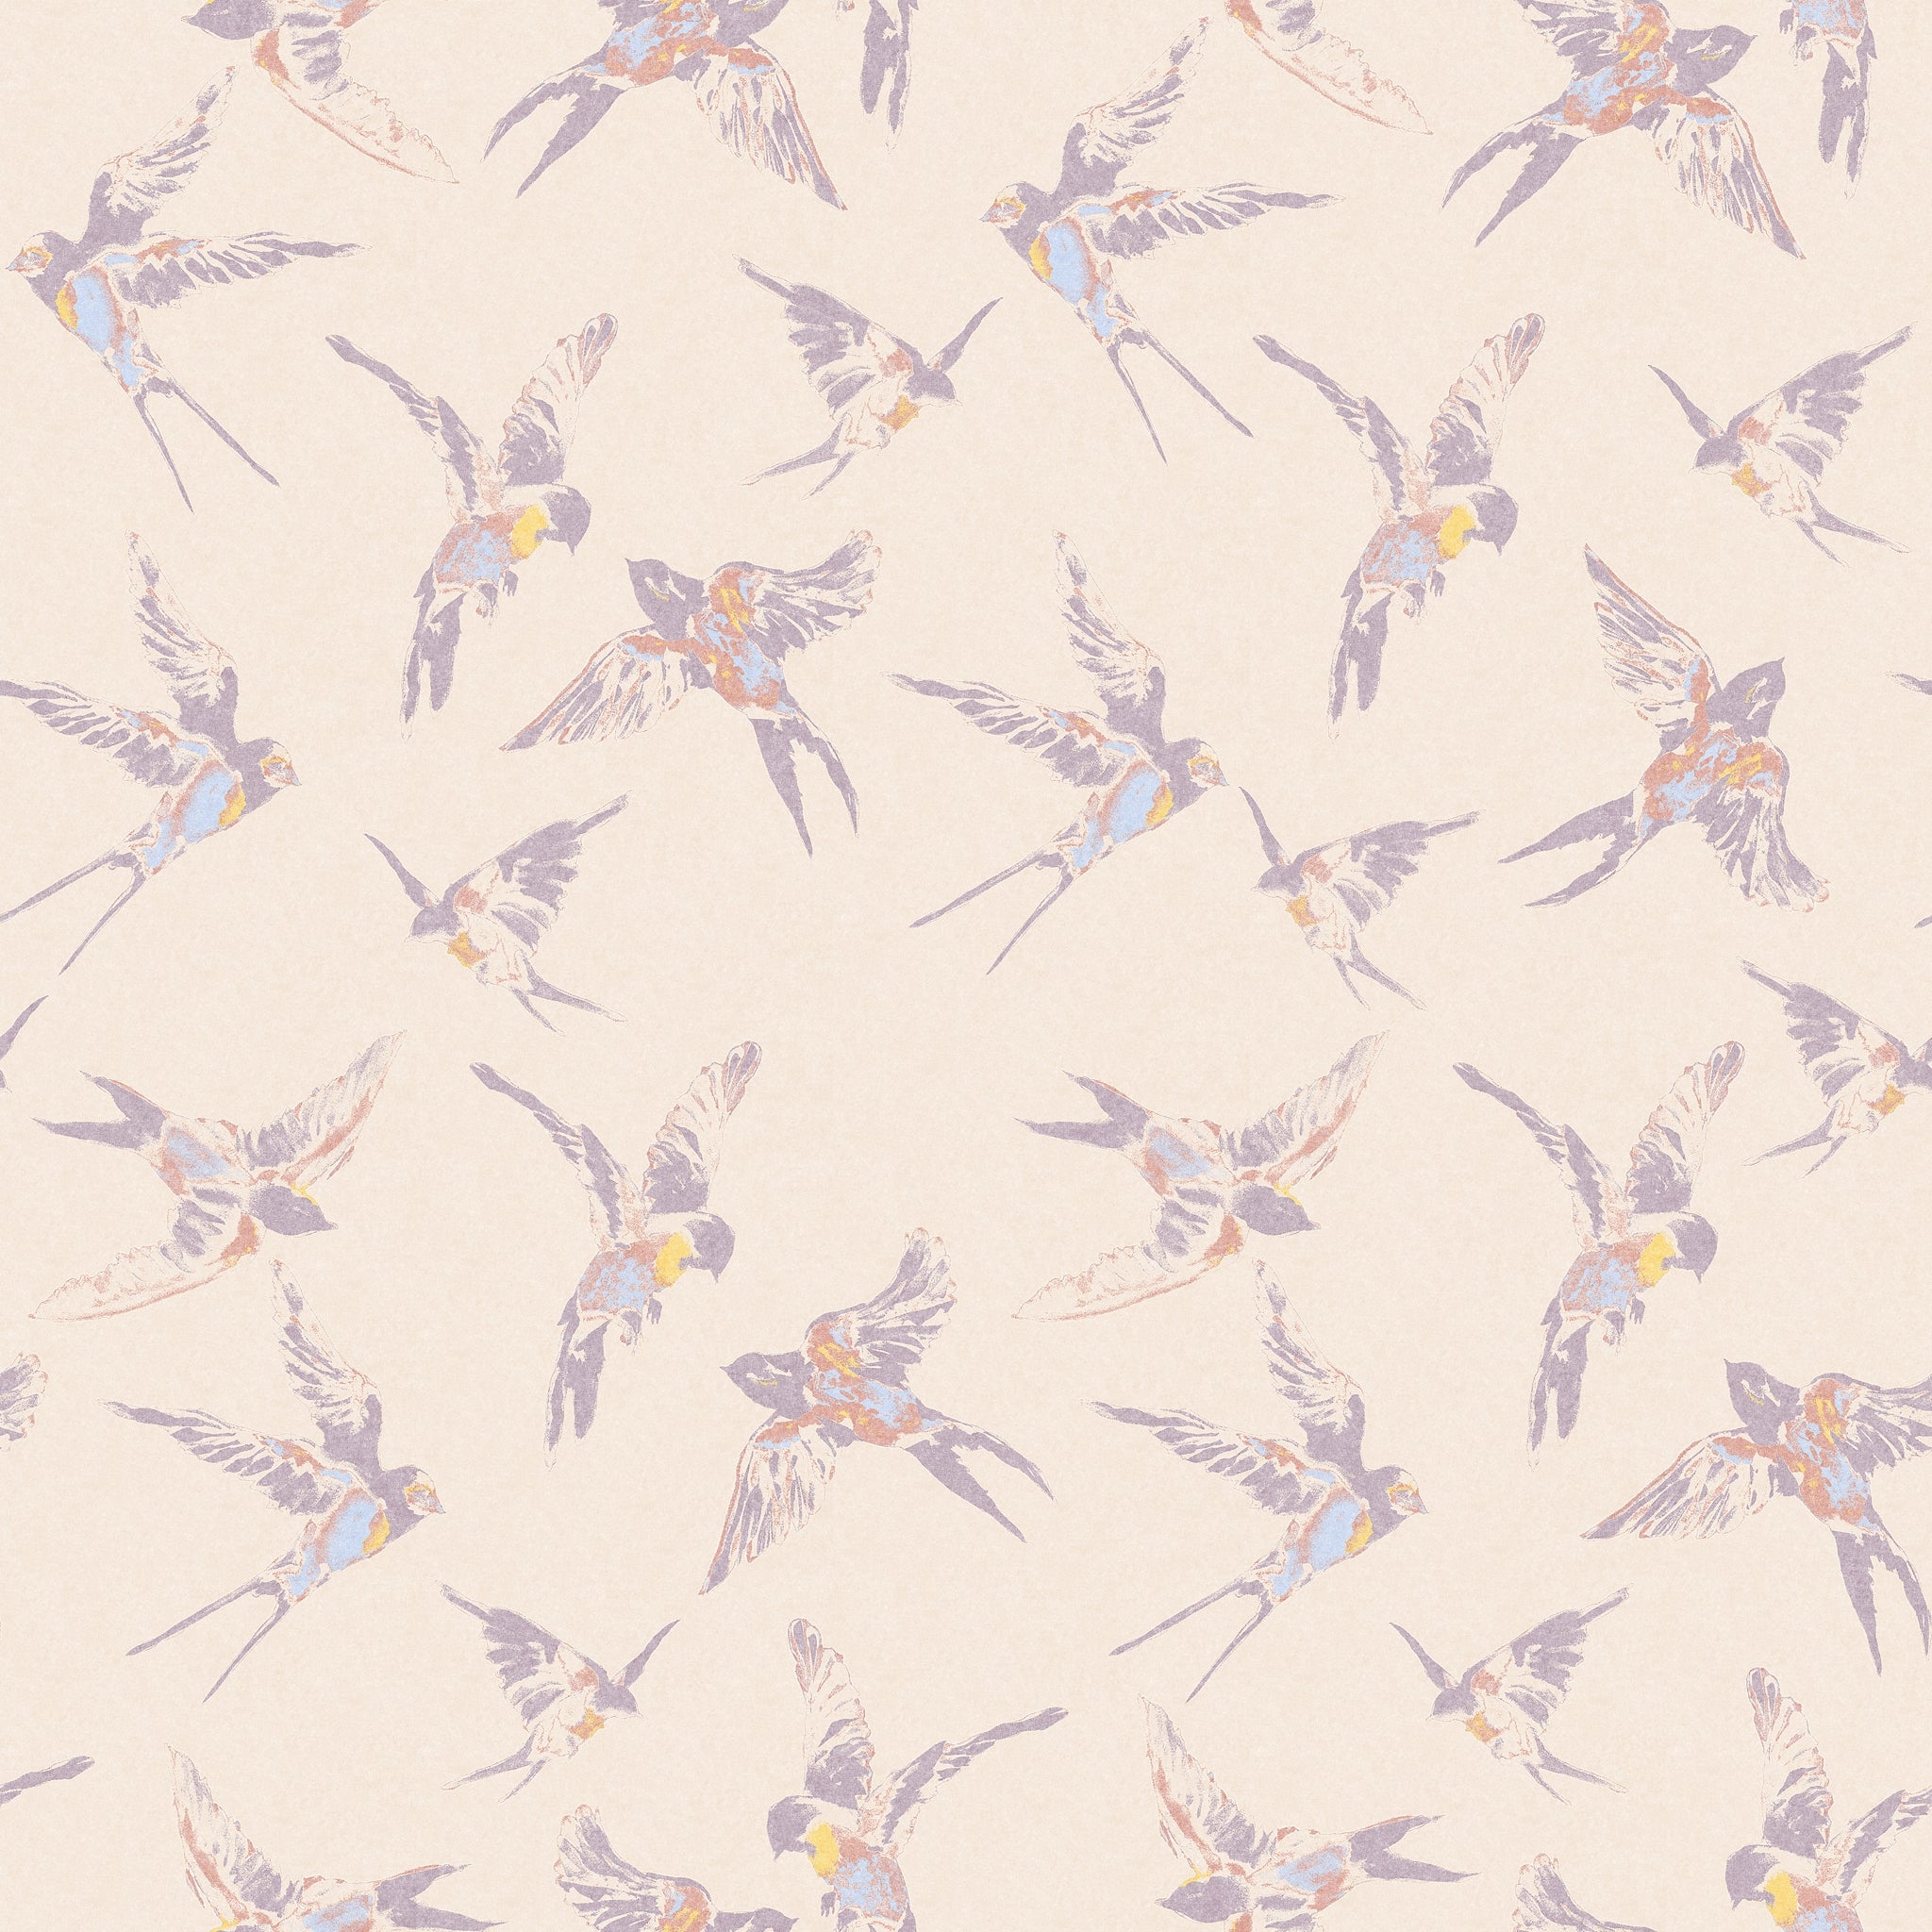 "Wall Blush's The Cheery Wallpaper featuring elegant birds in a bedroom setting, soft hues with a serene vibe."